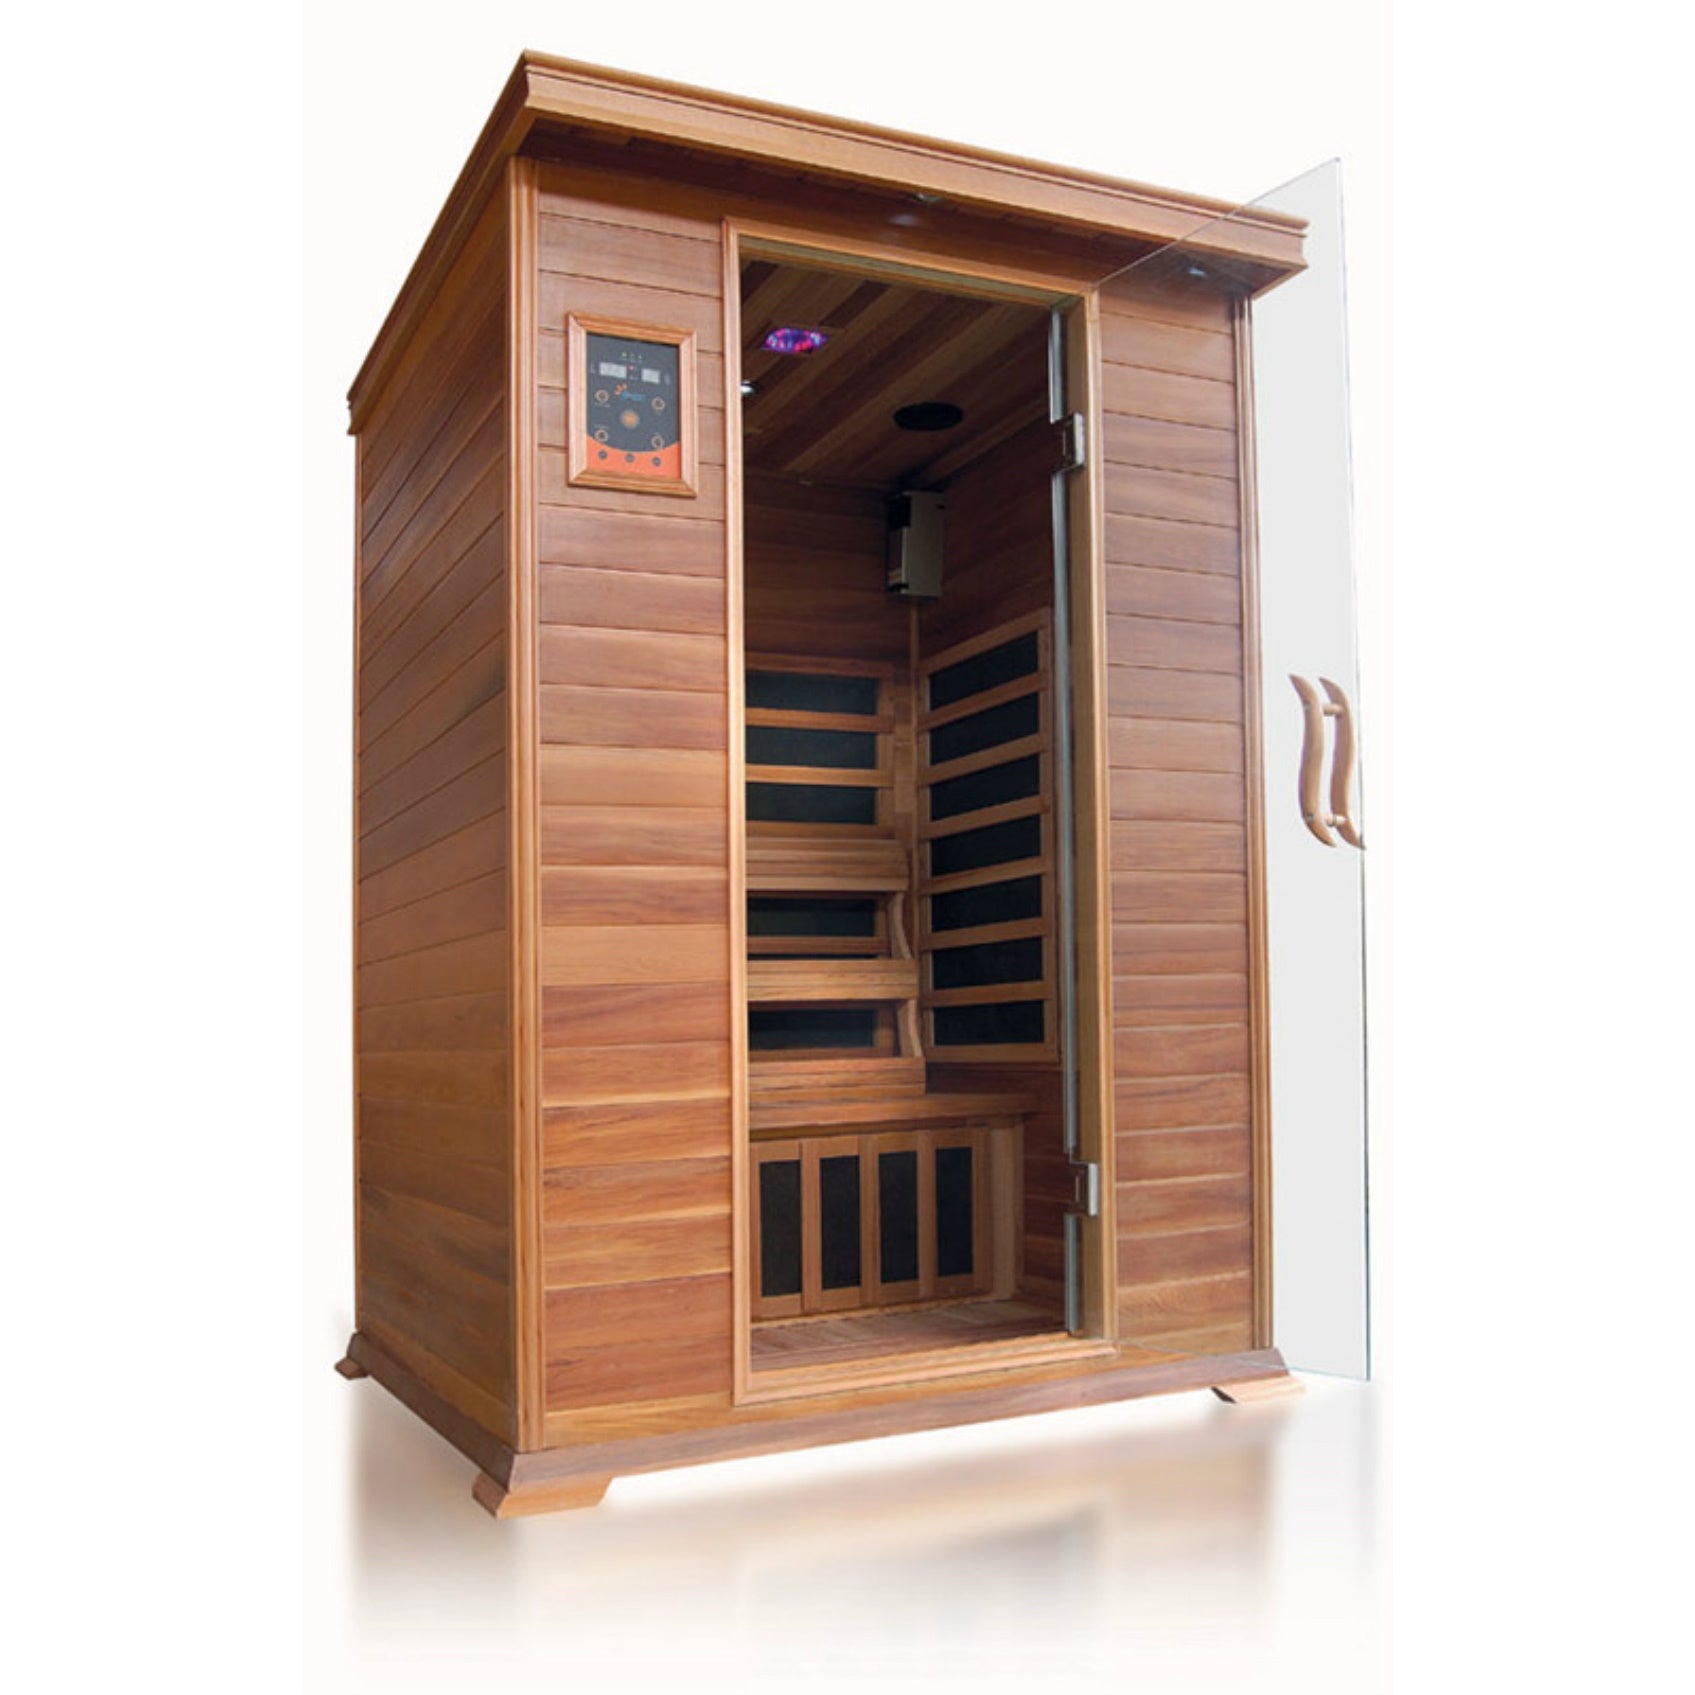 SunRay Sierra 2-Person Indoor Infrared Sauna - Natural Canadian Red Cedar with glass door, 7 infrared carbon nano heaters, Dual LED control panels, Recessed exterior lighting, chromatherapy mood lighting, ergonomic backrests - 200K